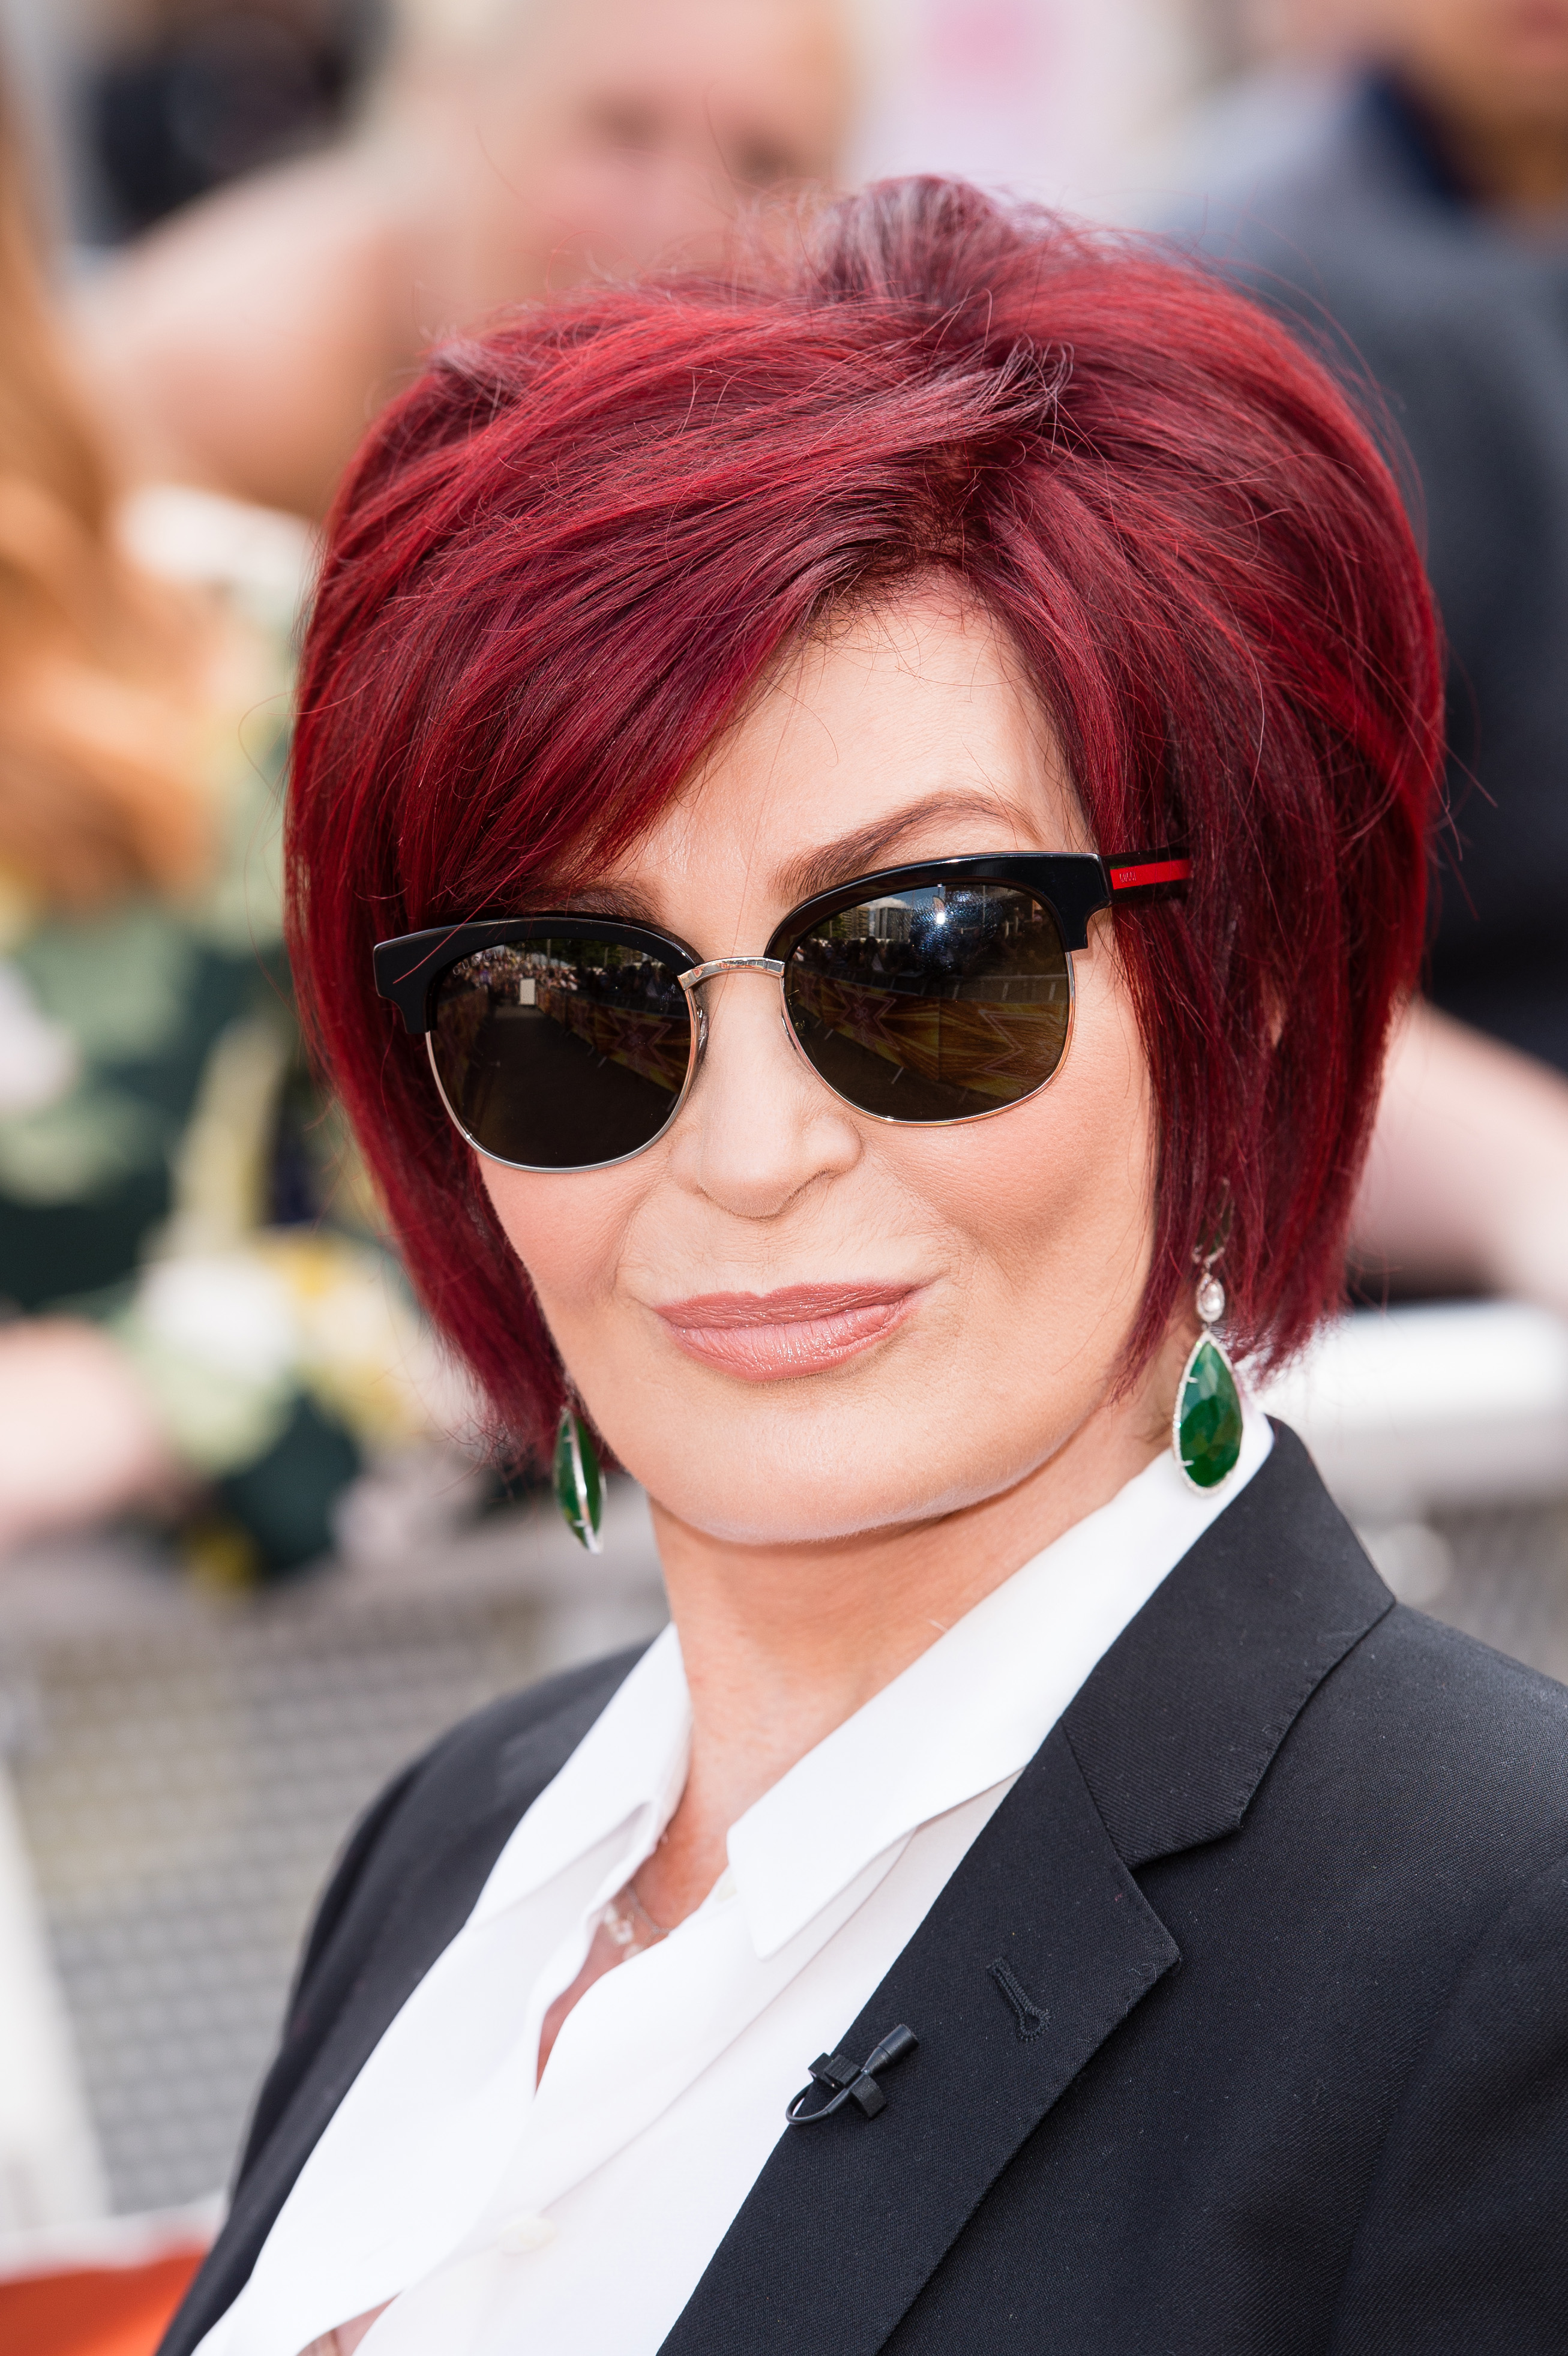 Sharon Osbourne during "The X Factor" bootcamp auditions  on July 21, 2017 in London, England | Source: Getty Images